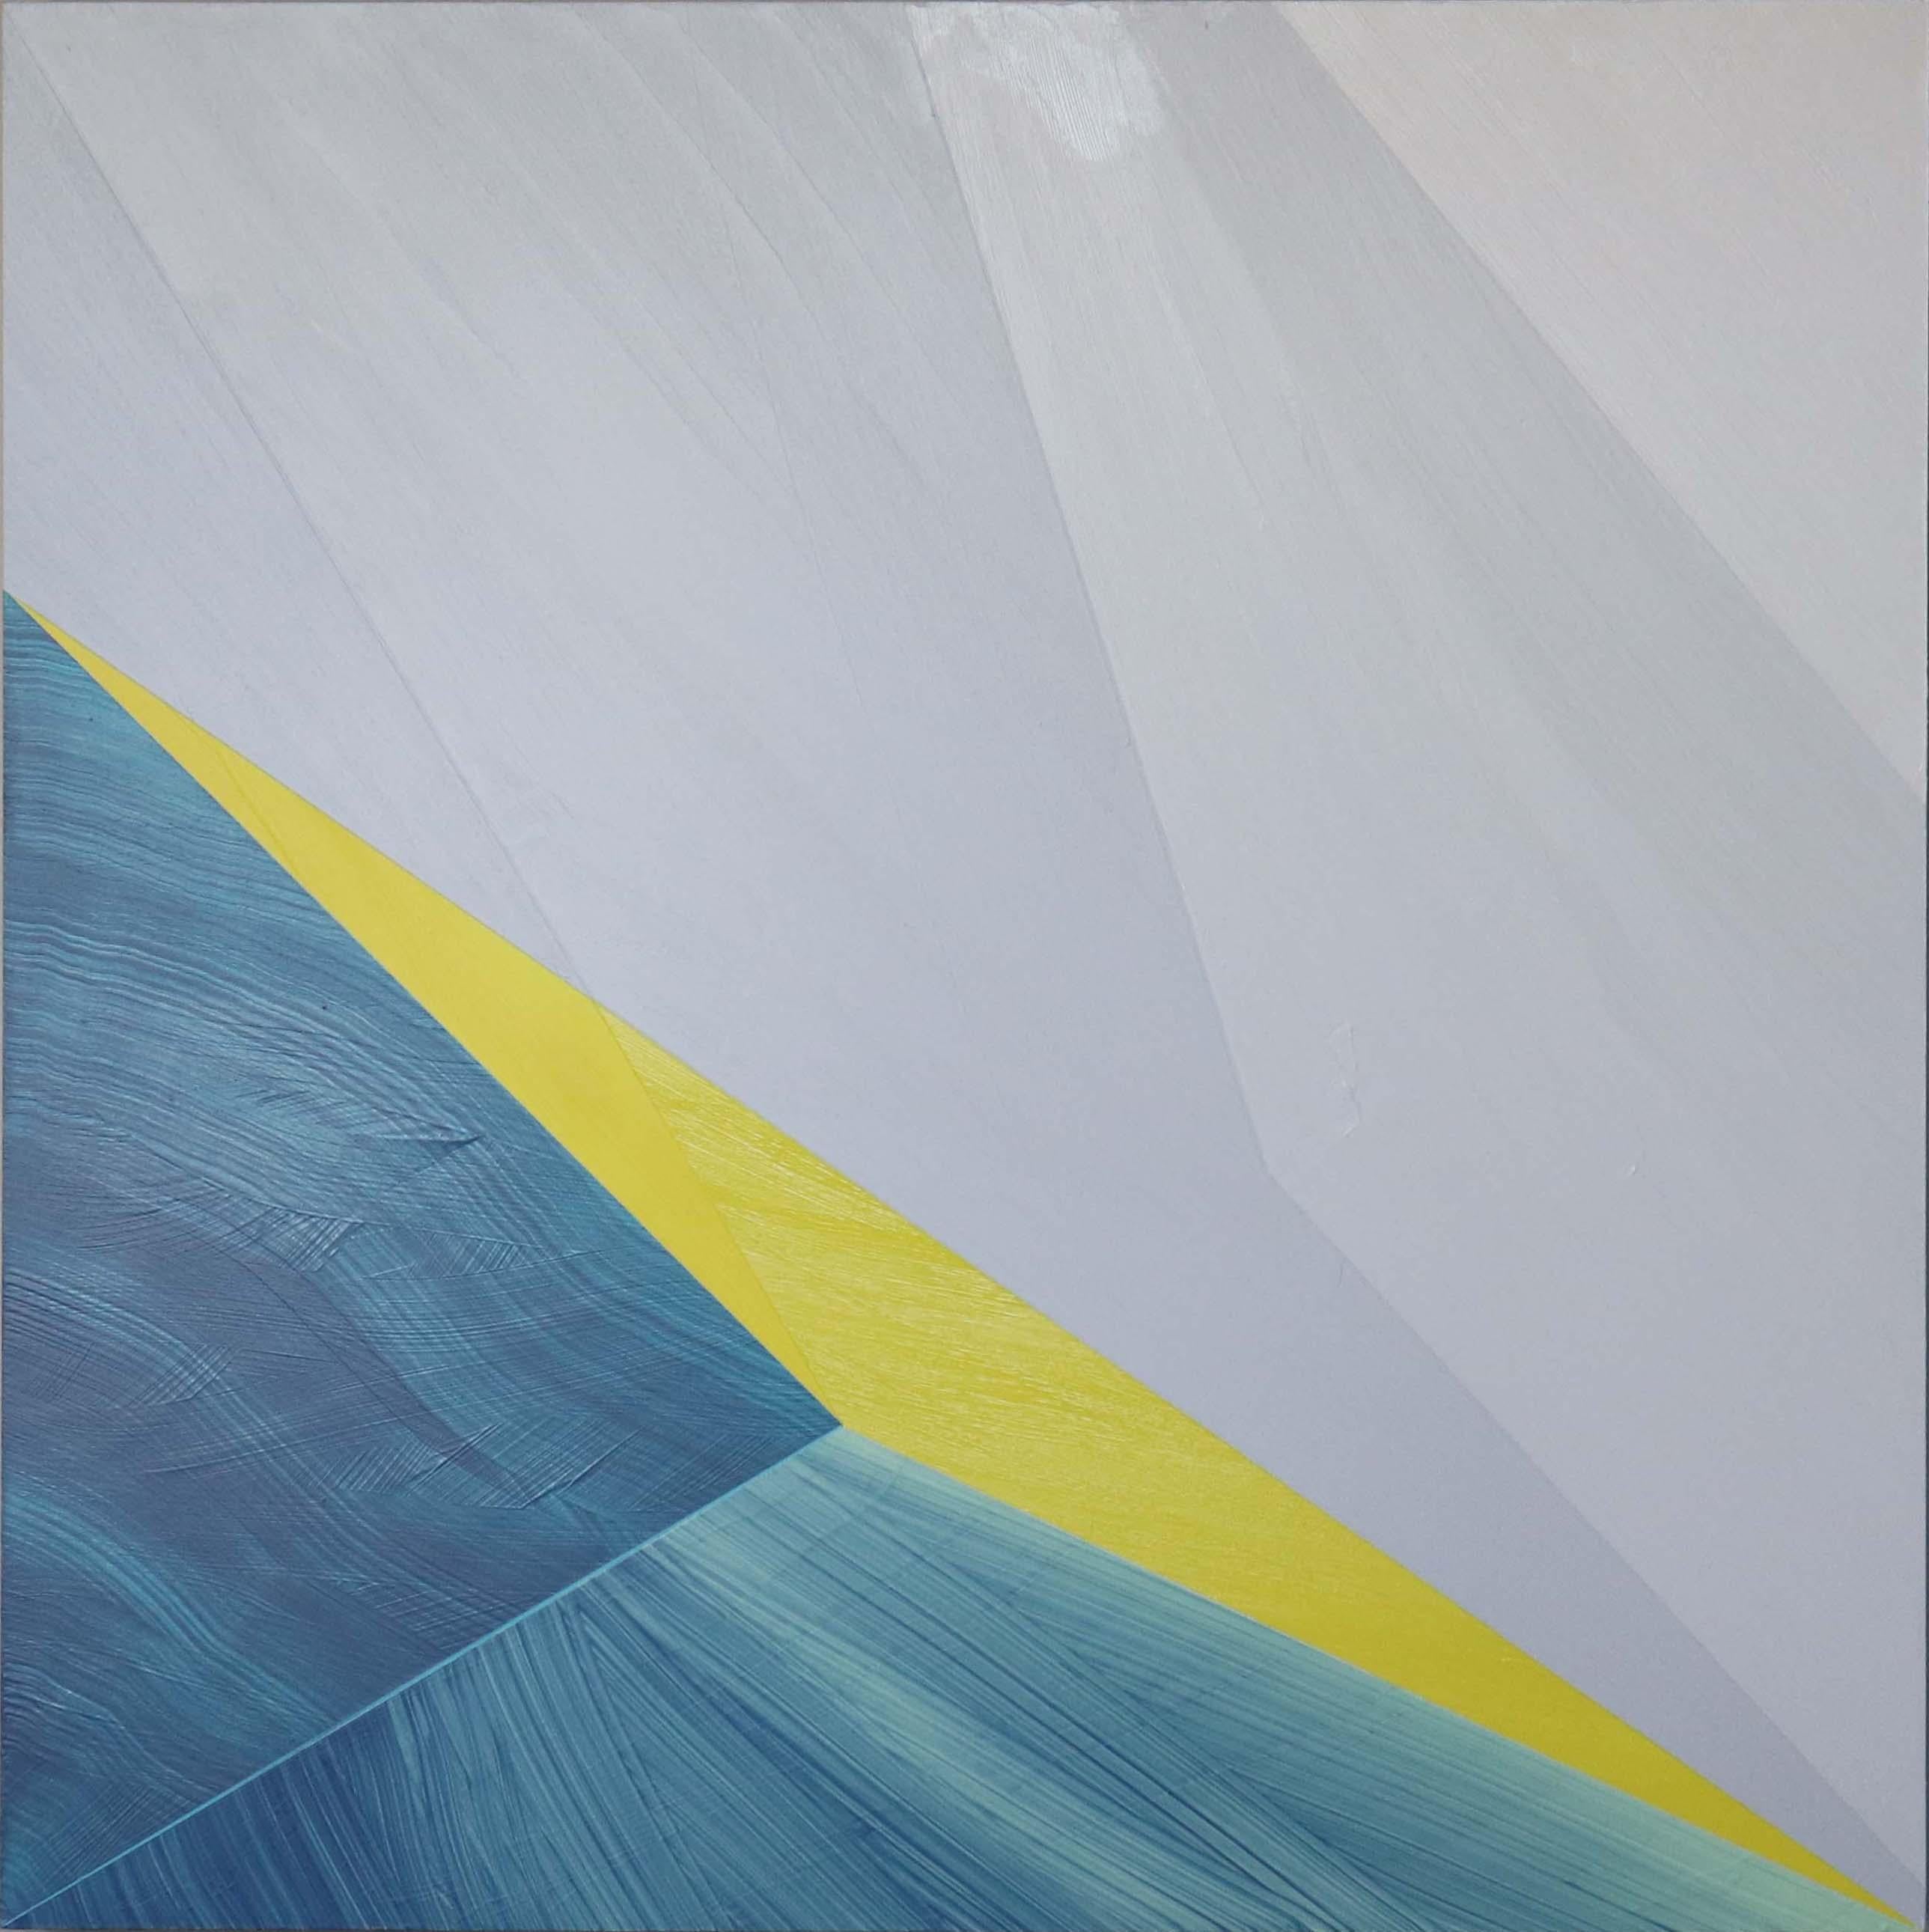 This acrylic on panel painting by Bryan Boone is the third in a series of balanced oppositional design. The square 24"x24" painting features a diagonal geometric color field of hues of blue, yellow, grey and white.

"Arrangement Impulsion'' is a